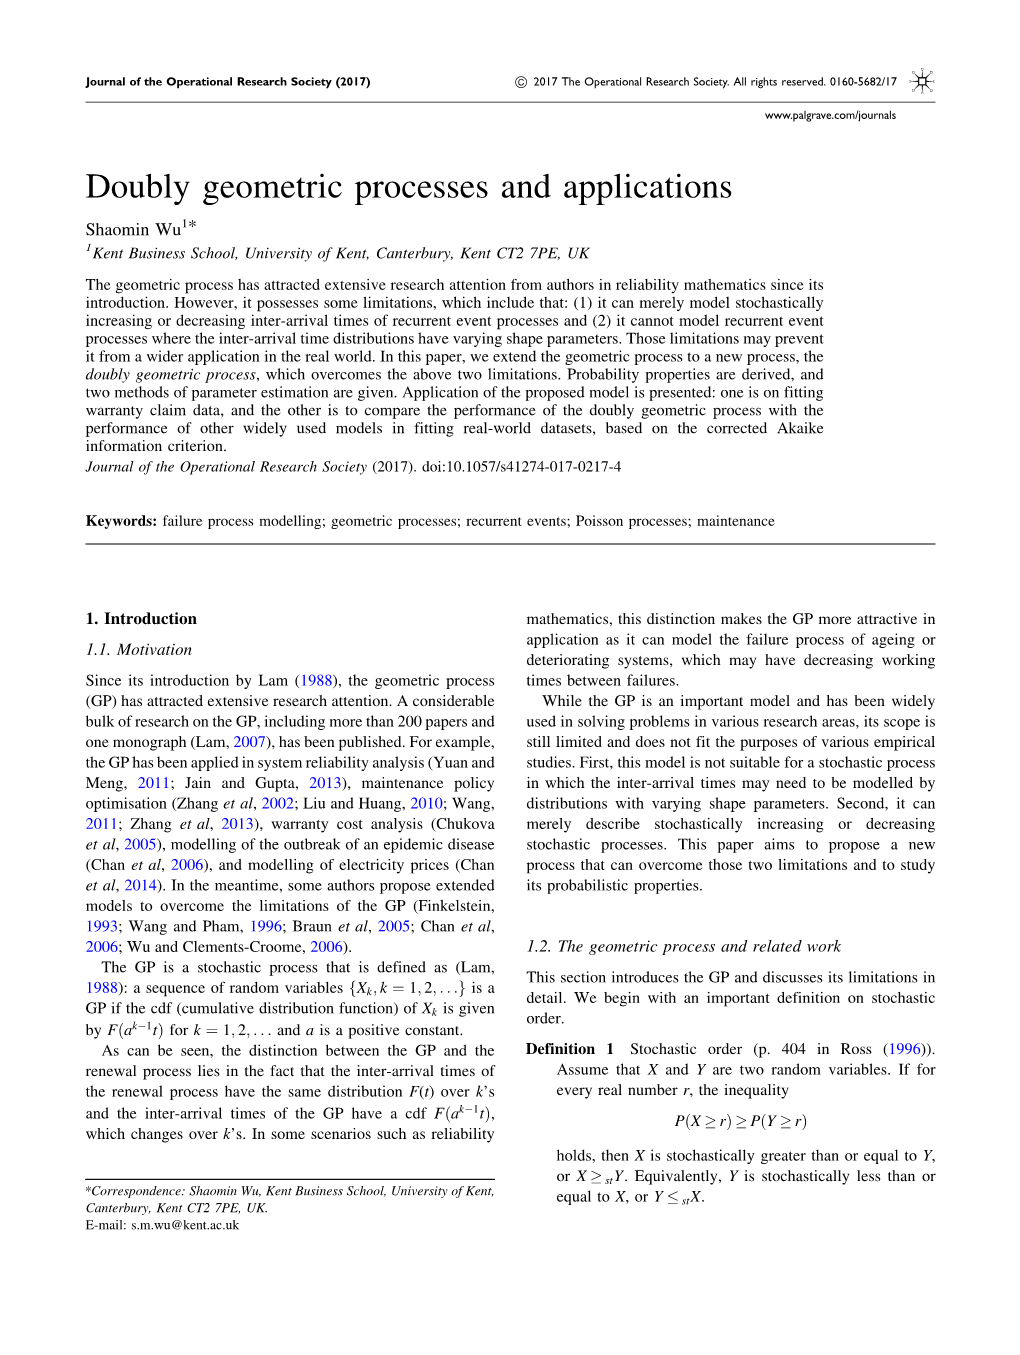 Doubly Geometric Processes and Applications